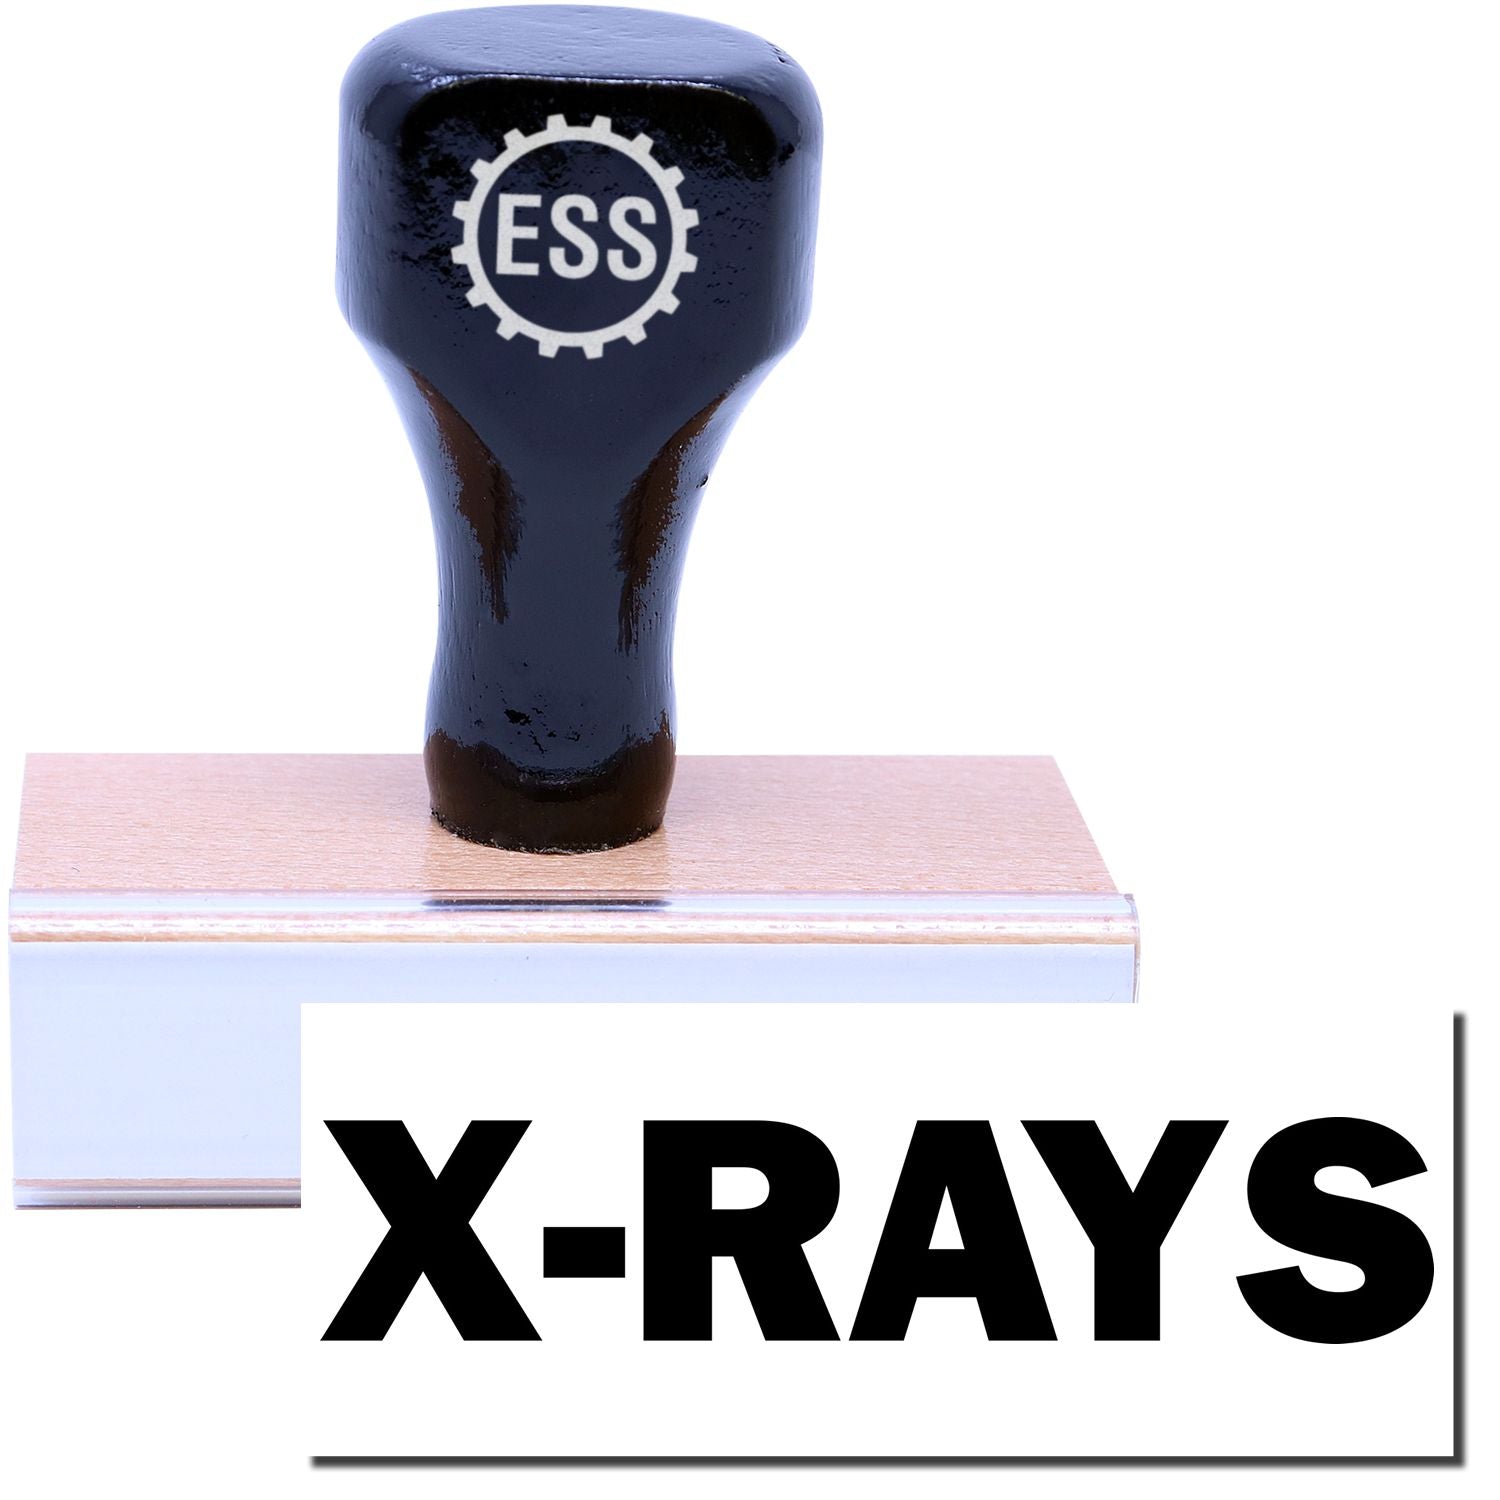 A stock office rubber stamp with a stamped image showing how the text "X-RAYS" is displayed after stamping.